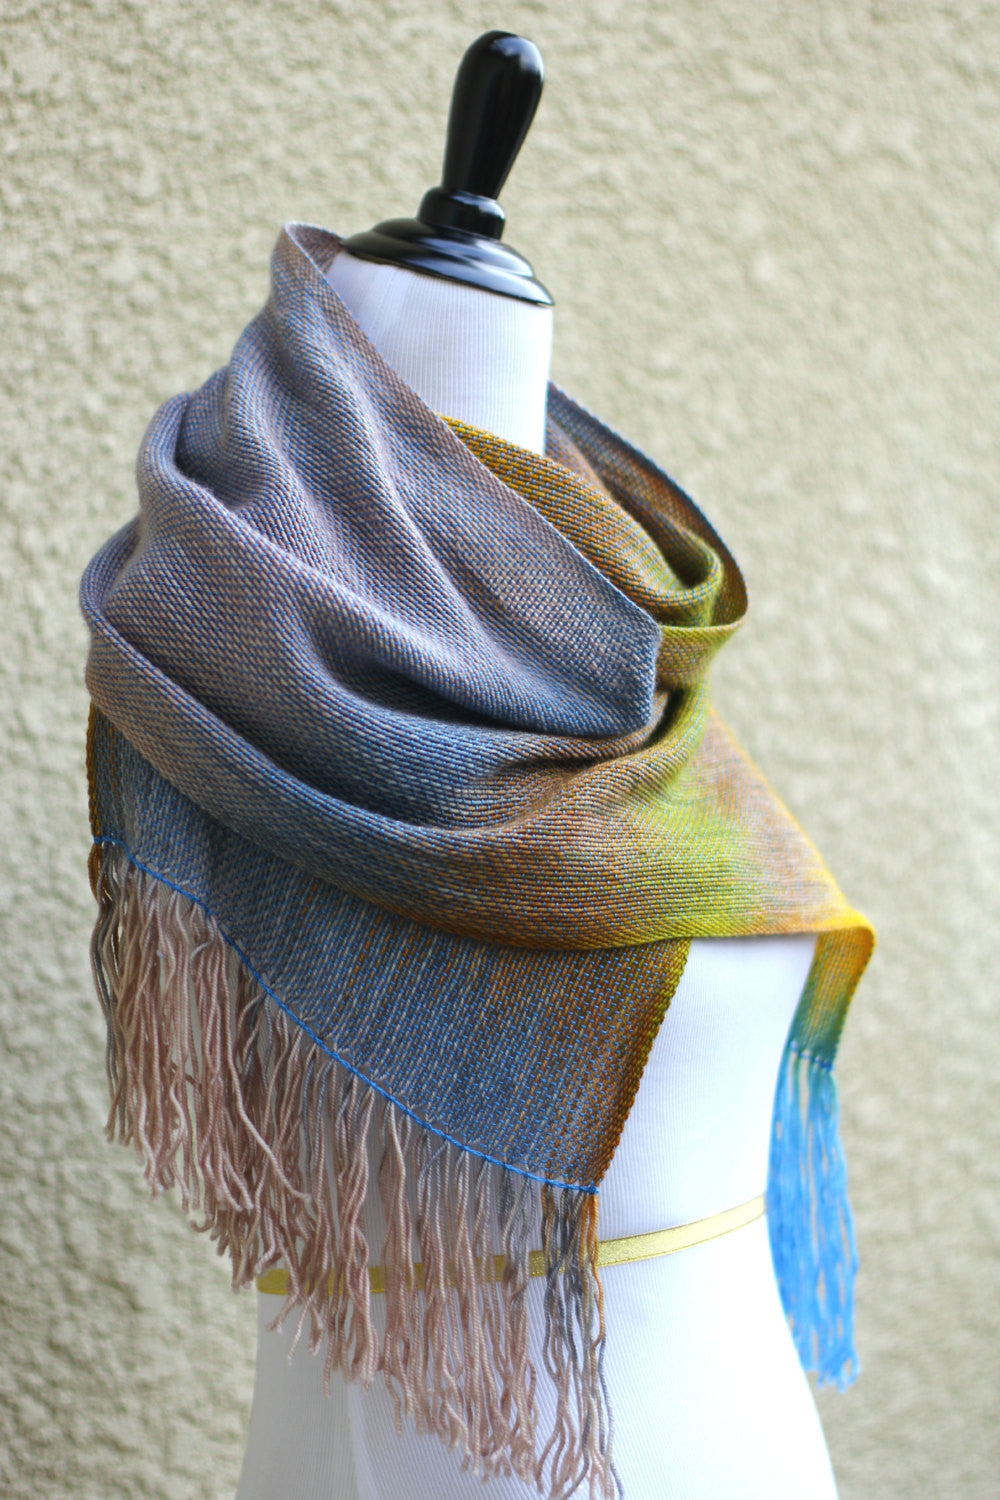 Hand woven wrap in grey and yellow colors